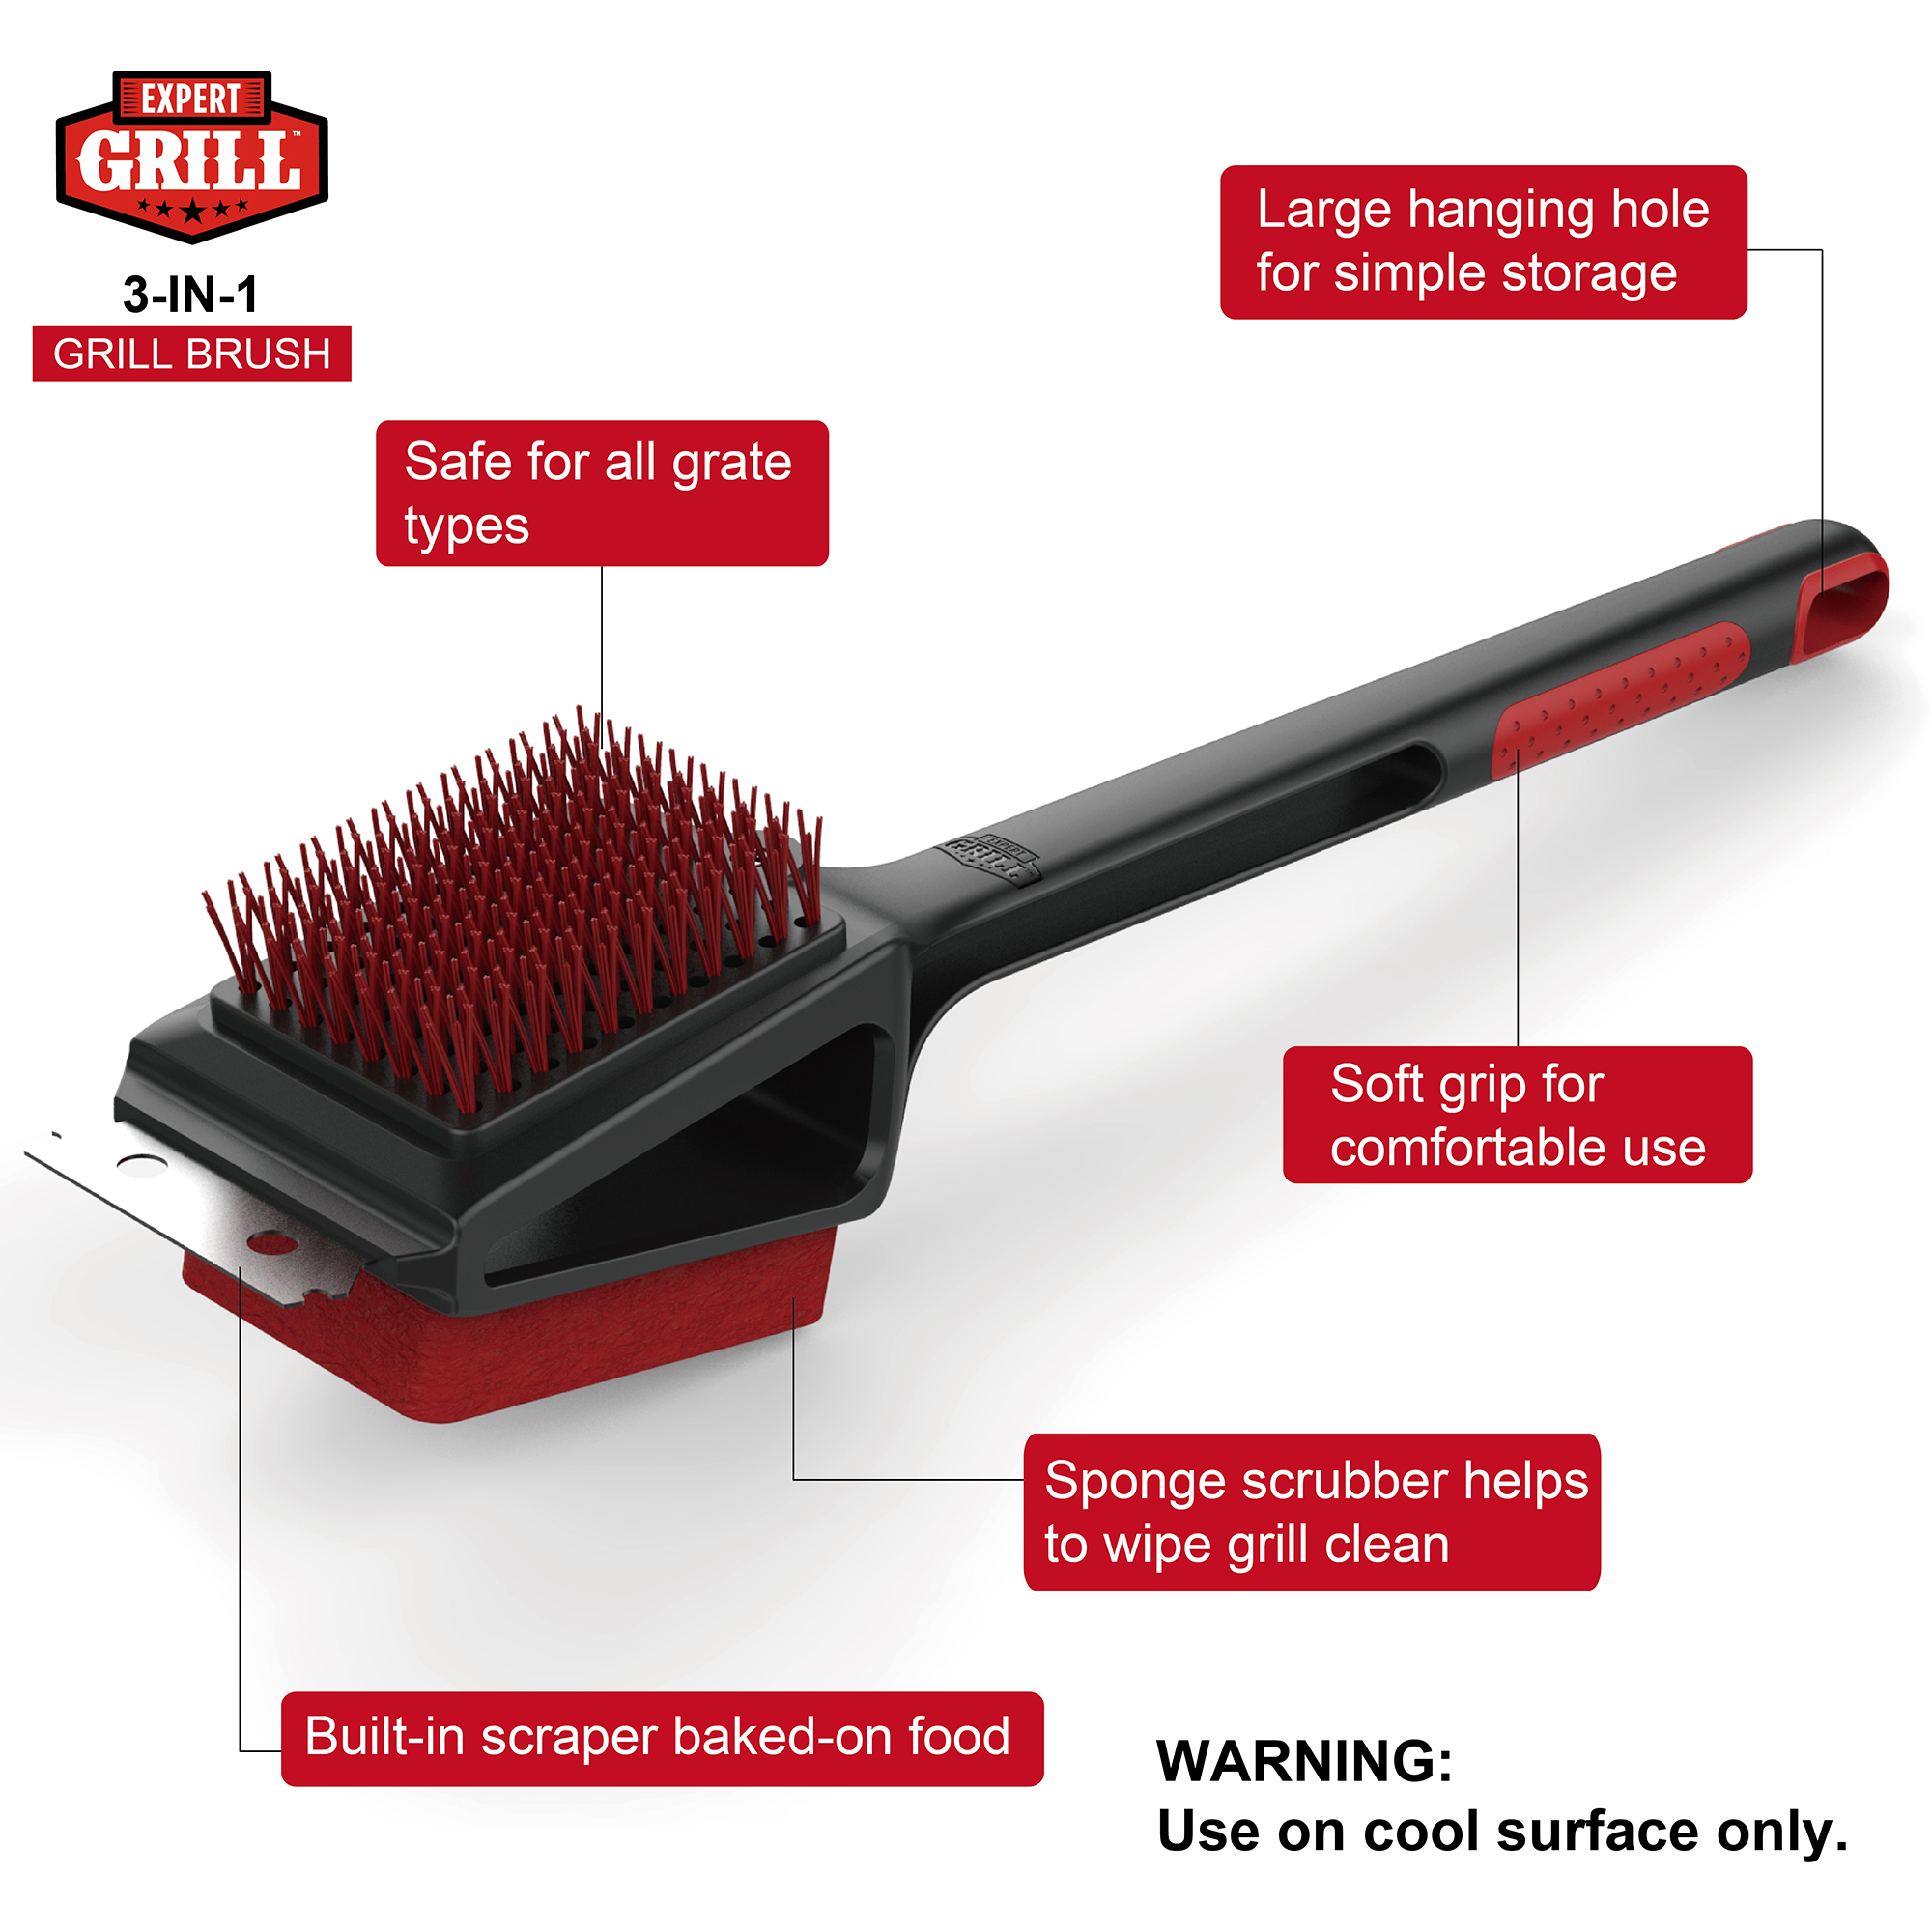 Expert Grill 3 in 1 Cleaning Cold Grill Brush with Stainless Steel Scraper - image 3 of 10